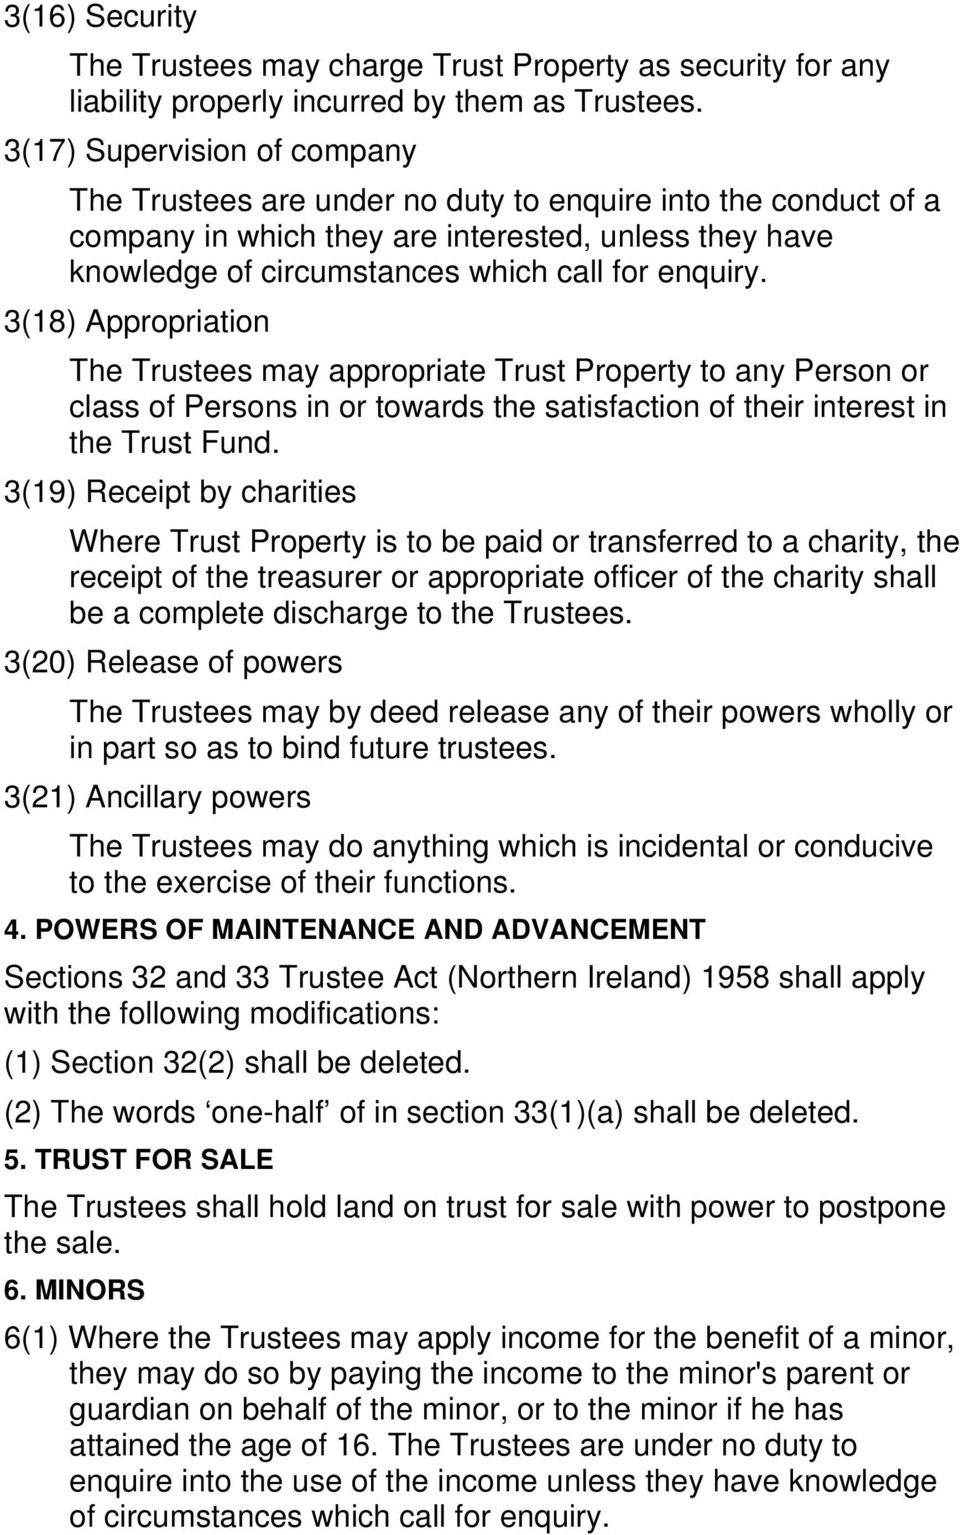 3(18) Appropriation The Trustees may appropriate Trust Property to any Person or class of Persons in or towards the satisfaction of their interest in the Trust Fund.